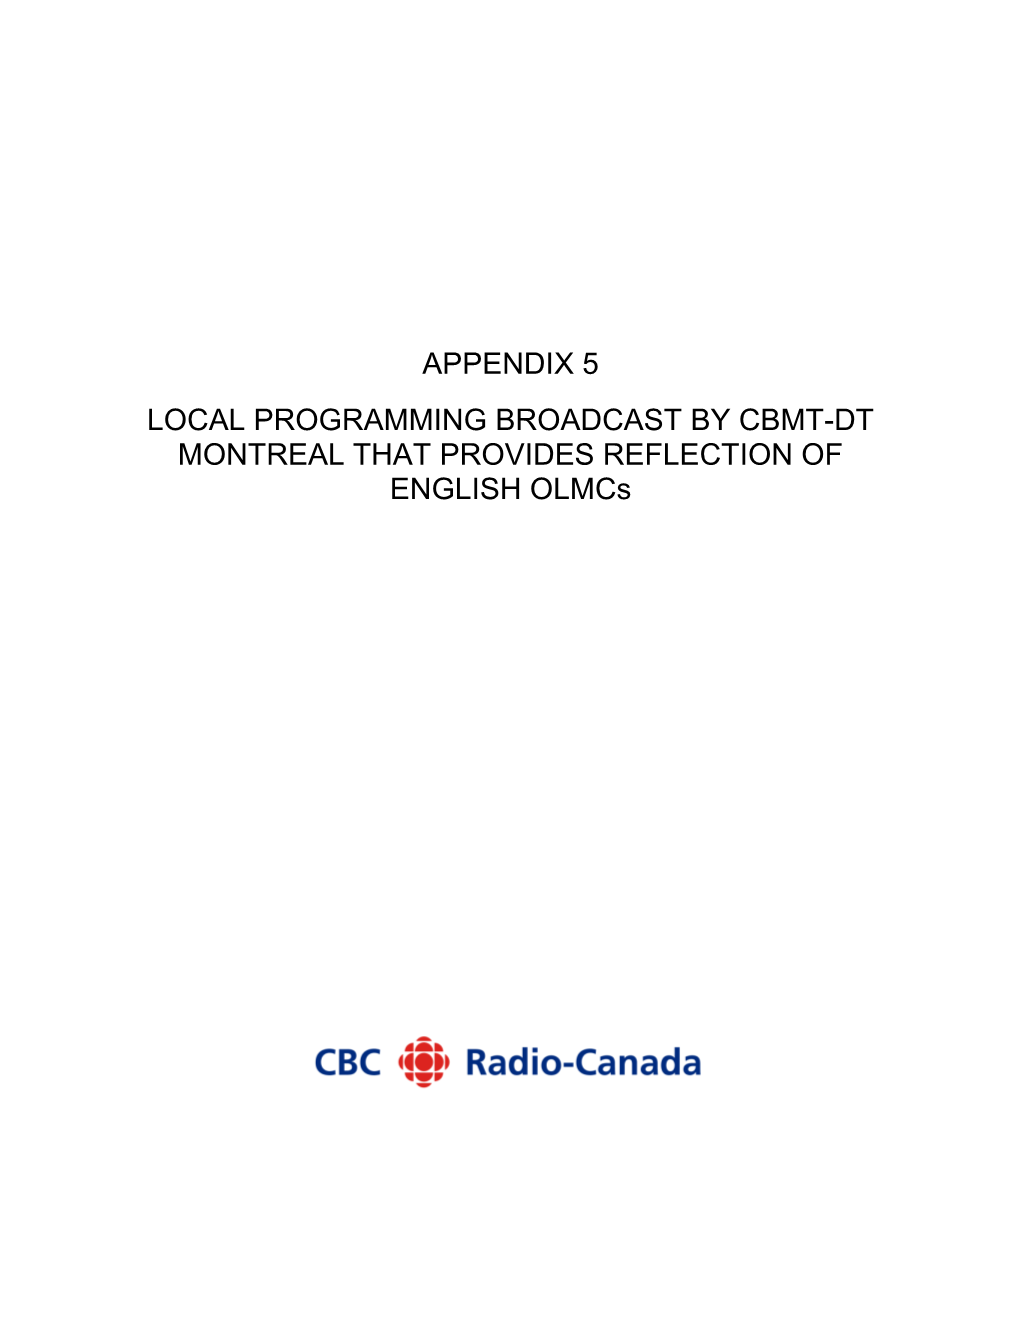 APPENDIX 5 LOCAL PROGRAMMING BROADCAST by CBMT-DT MONTREAL THAT PROVIDES REFLECTION of ENGLISH Olmcs